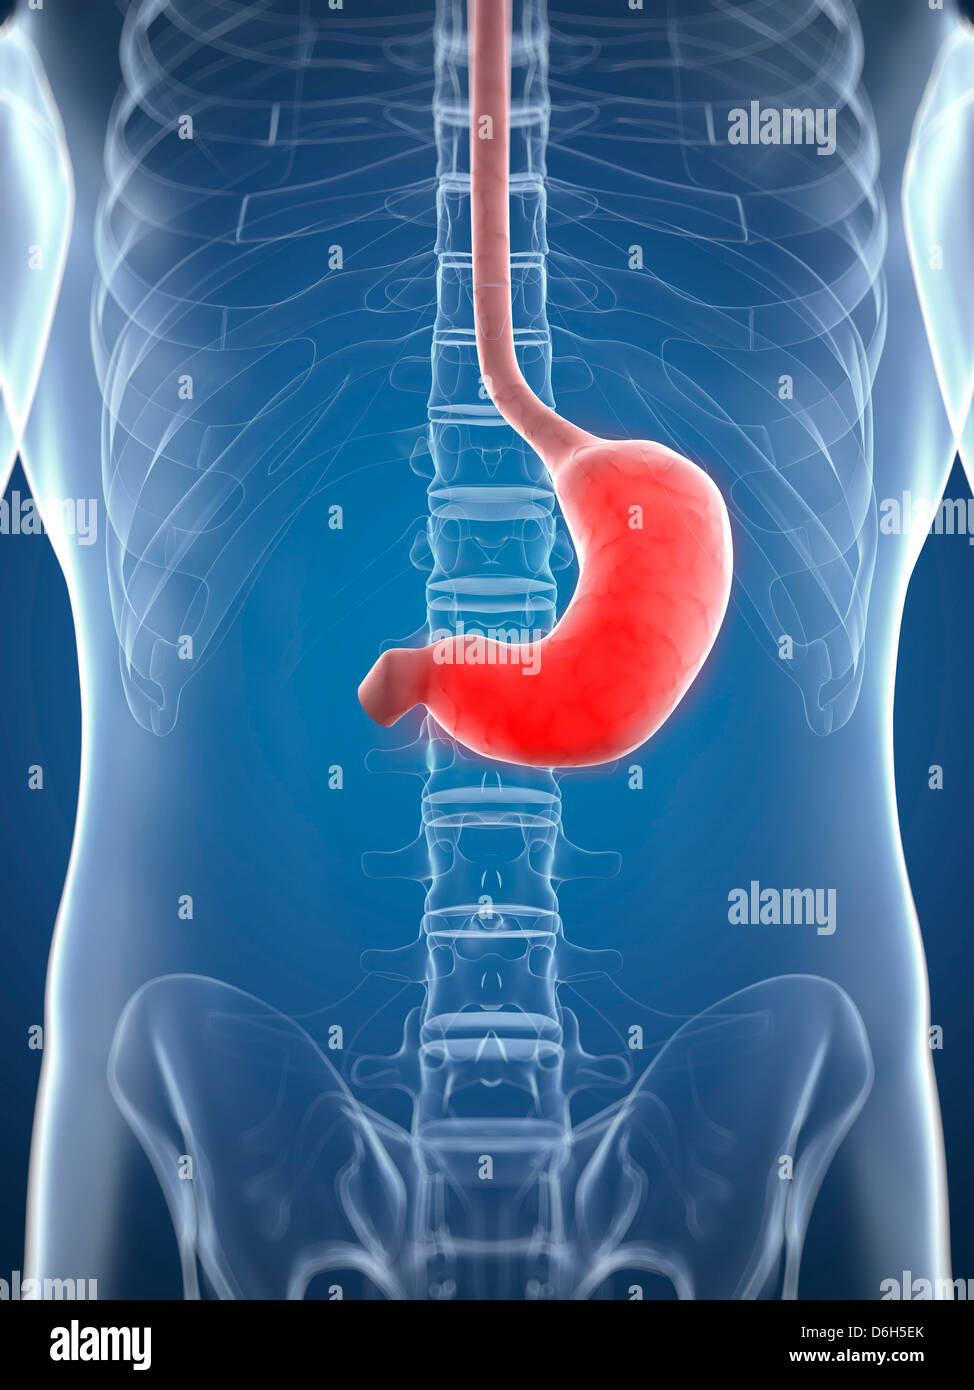 Inflamed stomach, conceptual artwork Stock Photo